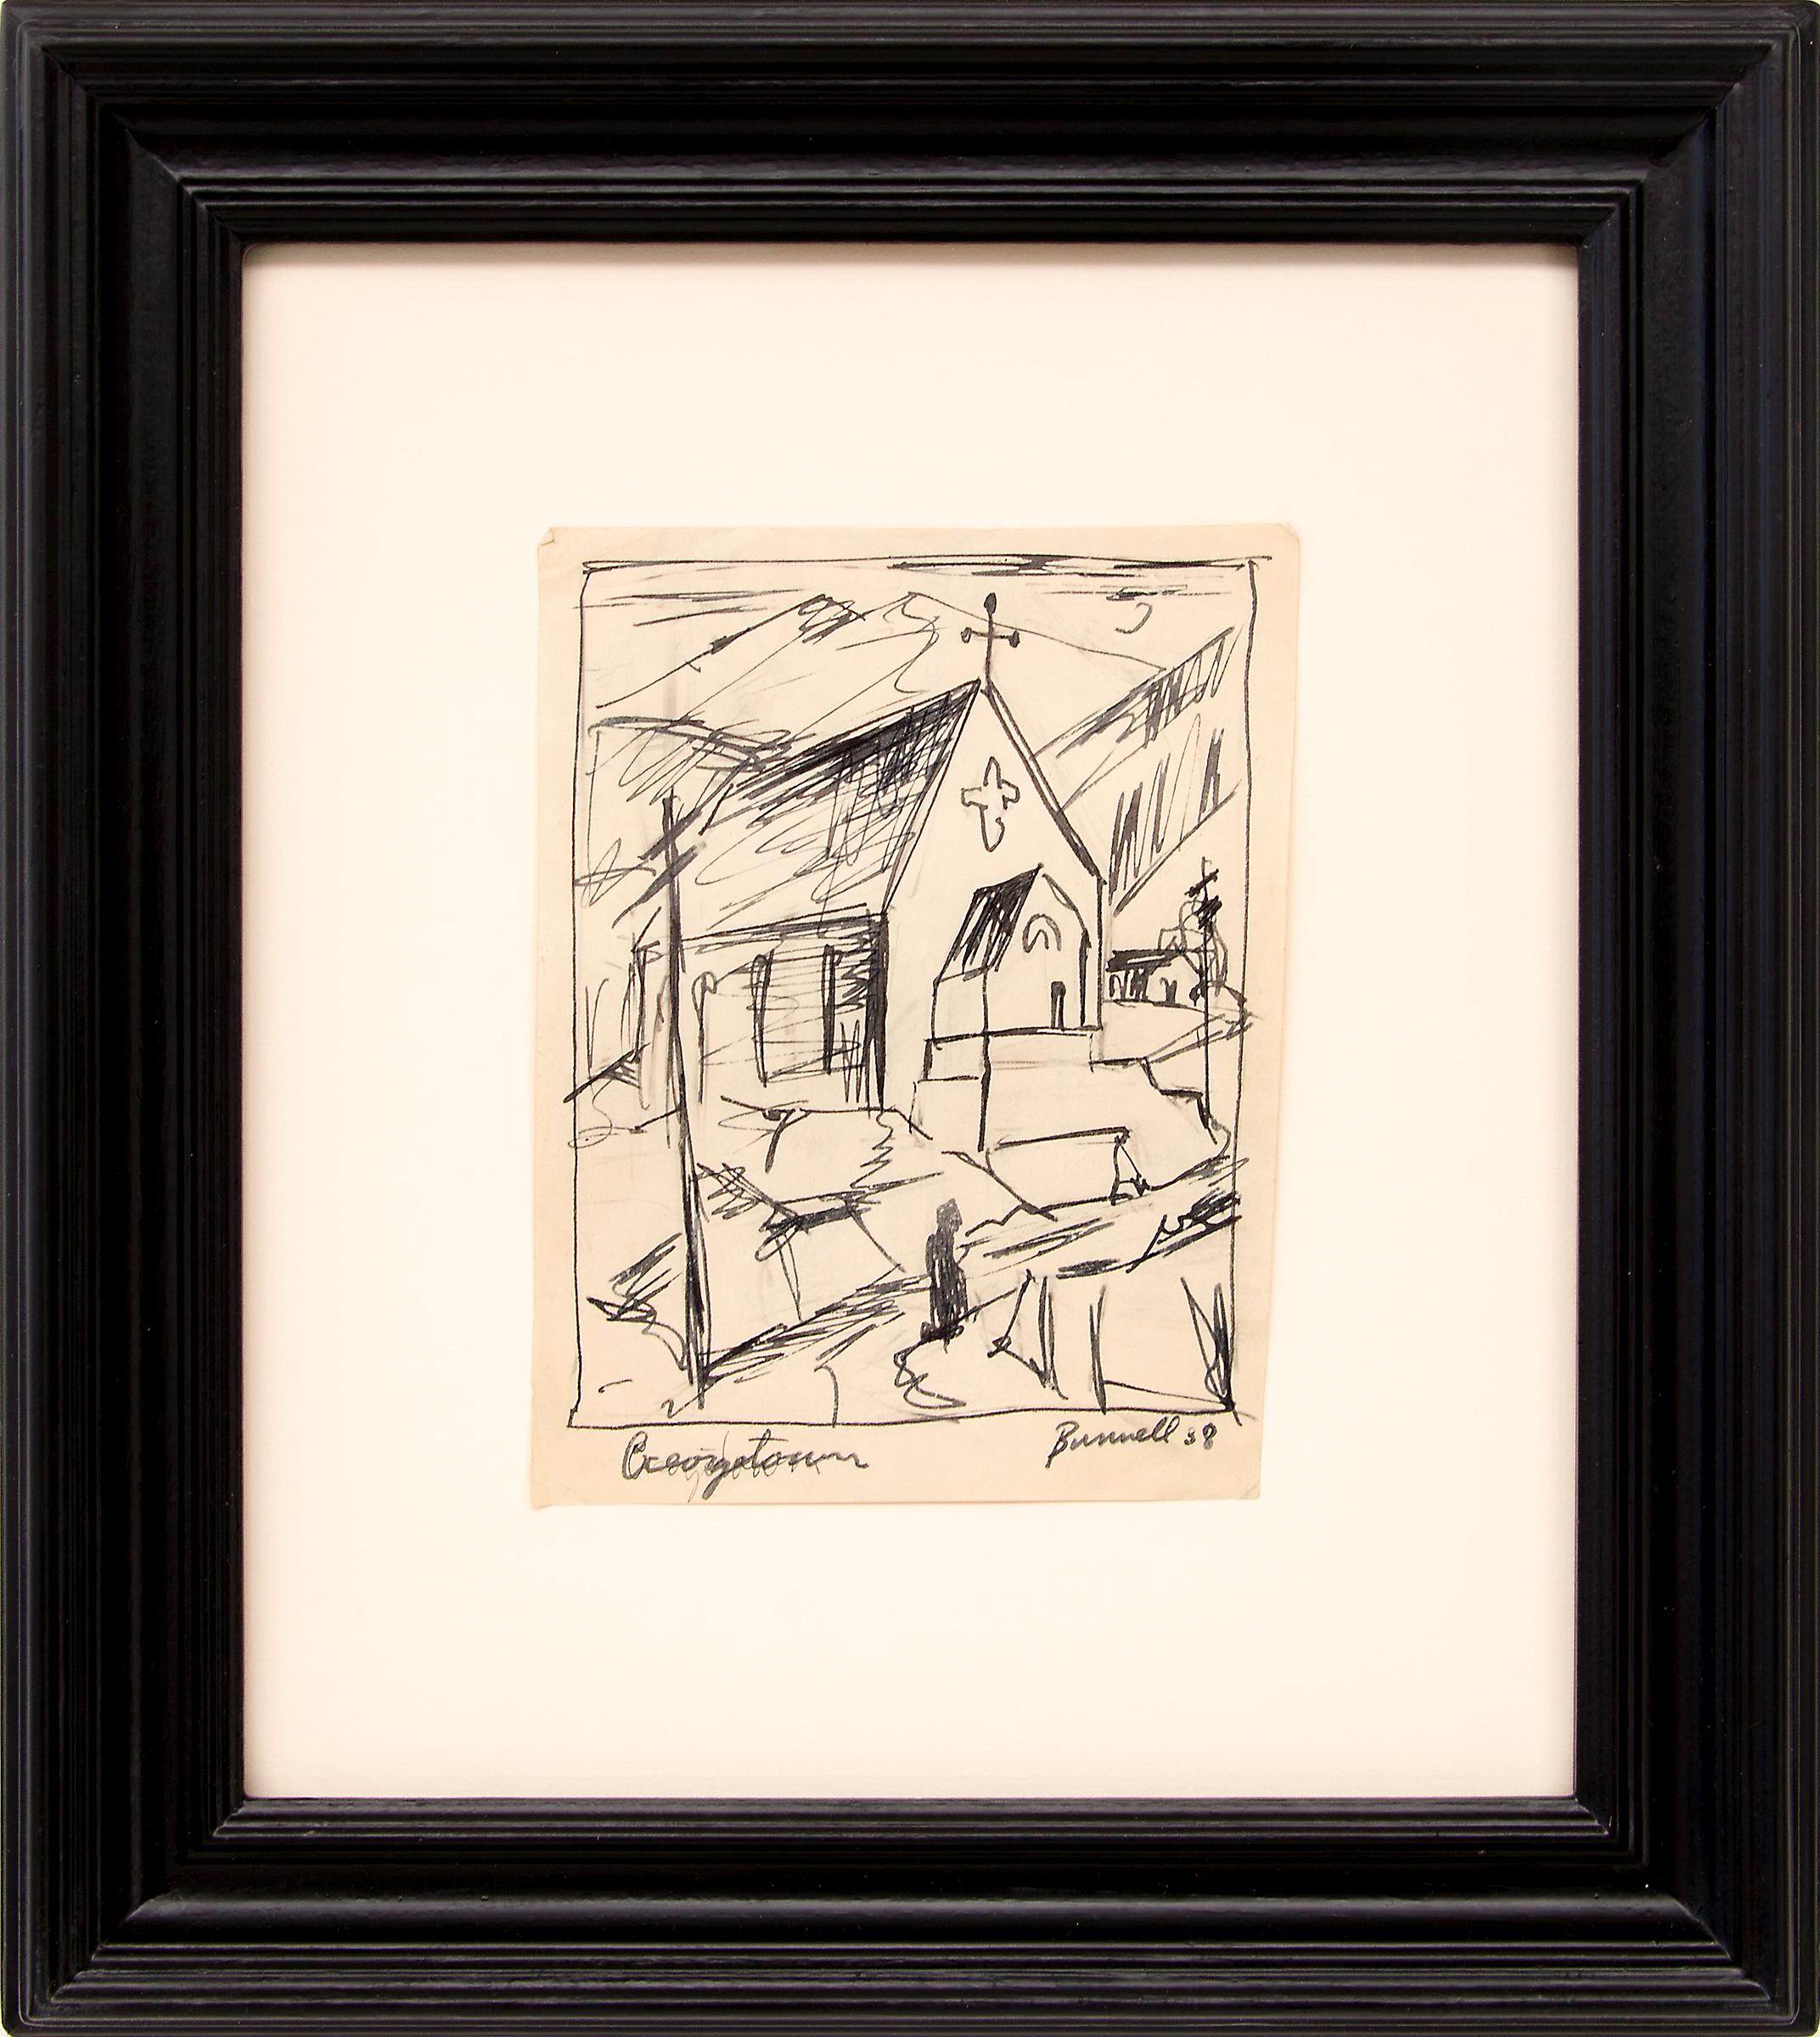 Georgetown (Church in the Mountains, Colorado), Modernist Landscape Ink Drawing